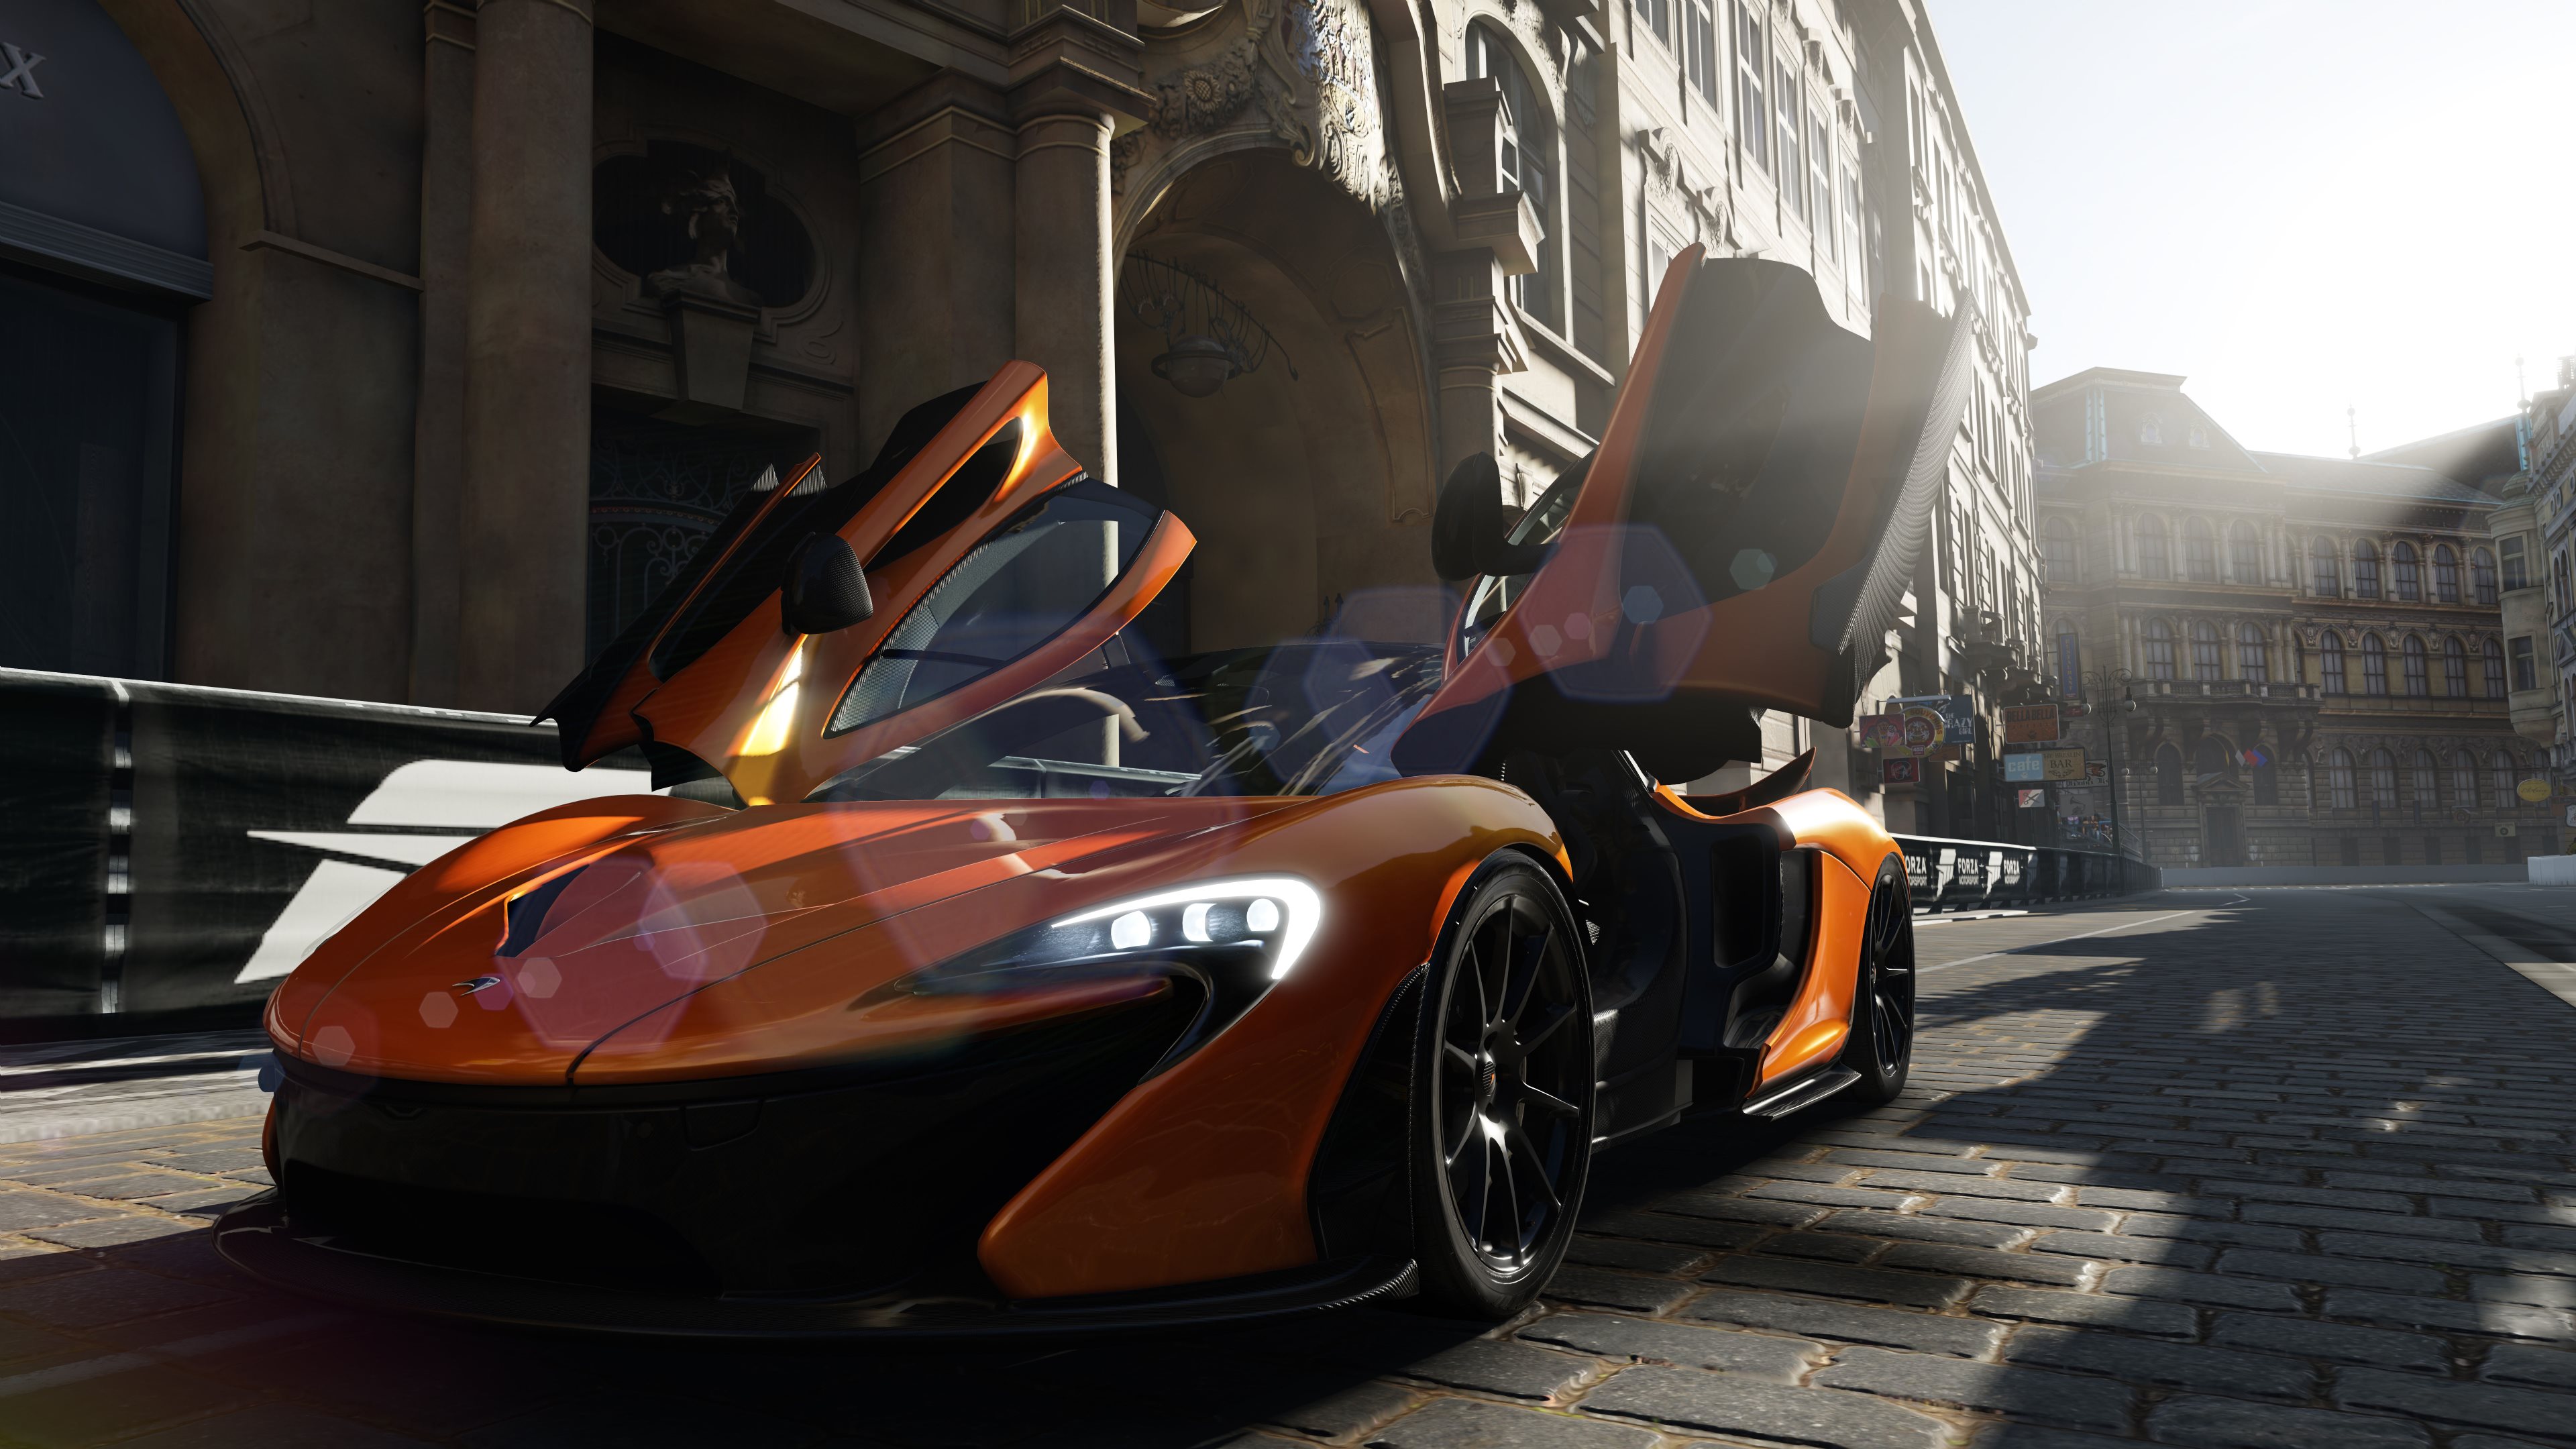 66 Forza Motorsport 5 HD Wallpapers | Backgrounds - Wallpaper Abyss